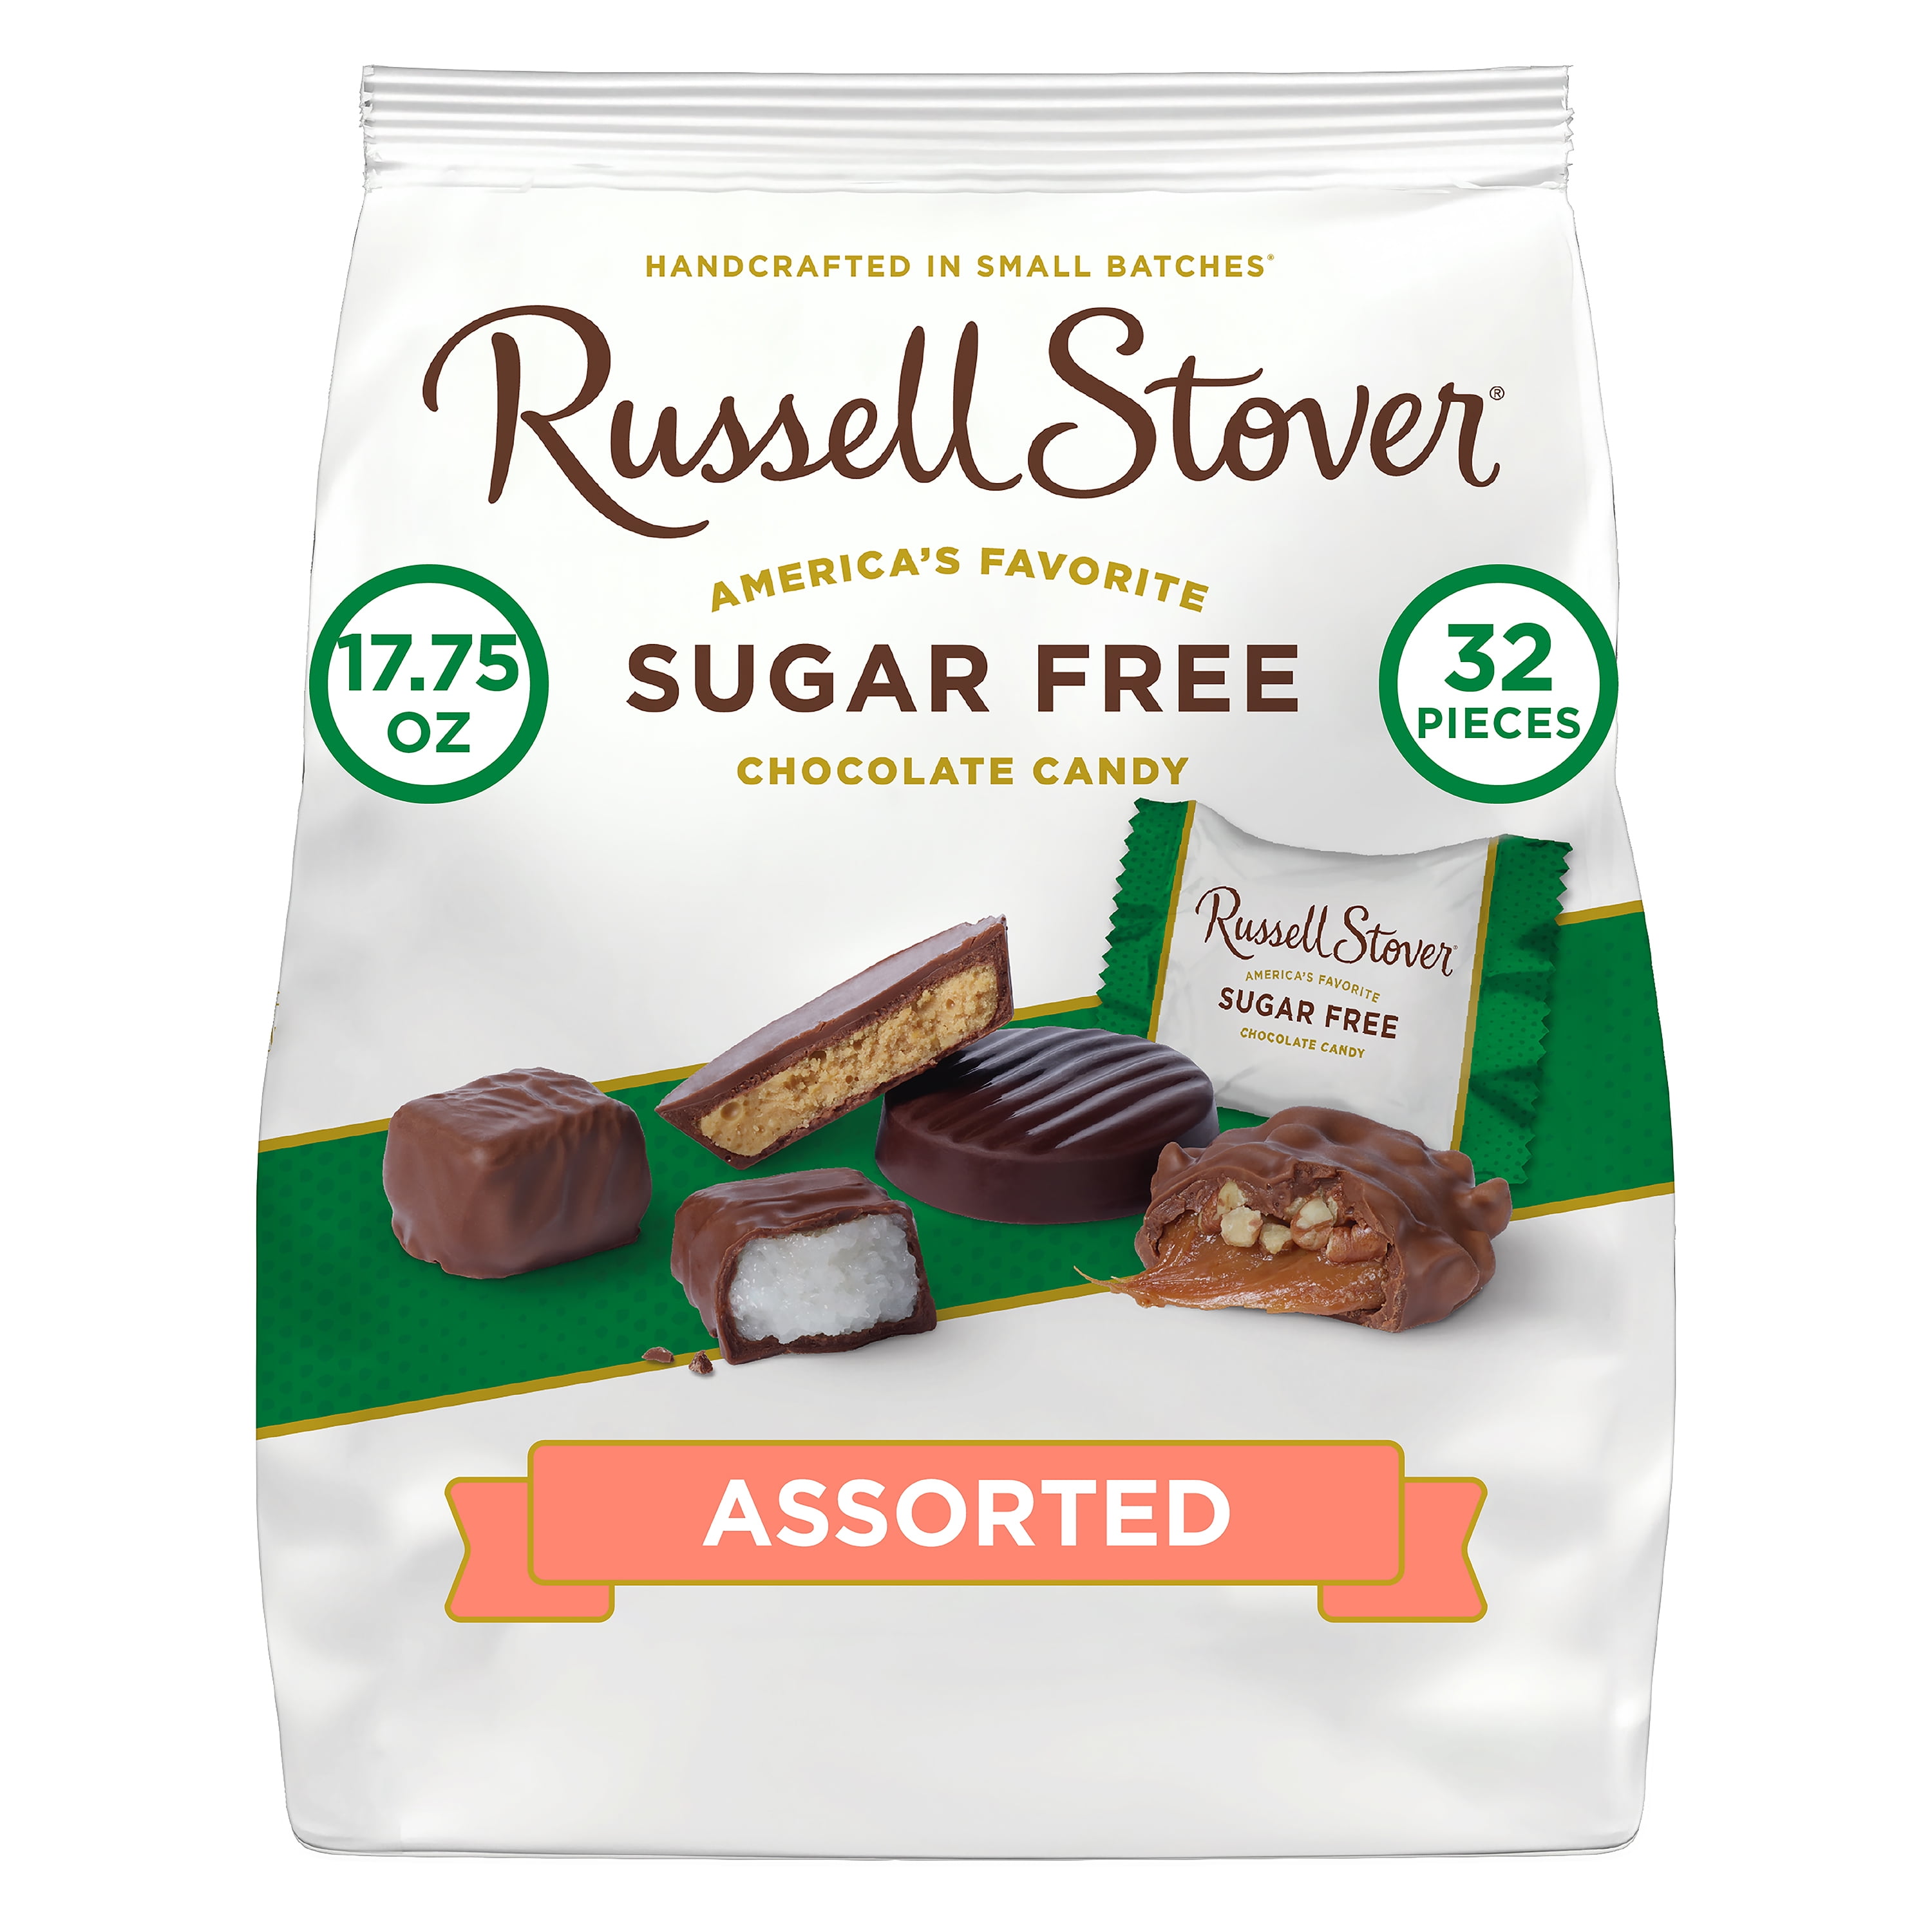 Russell Stover Sugar Free Assortment Chocolate Candy, 17.75 oz